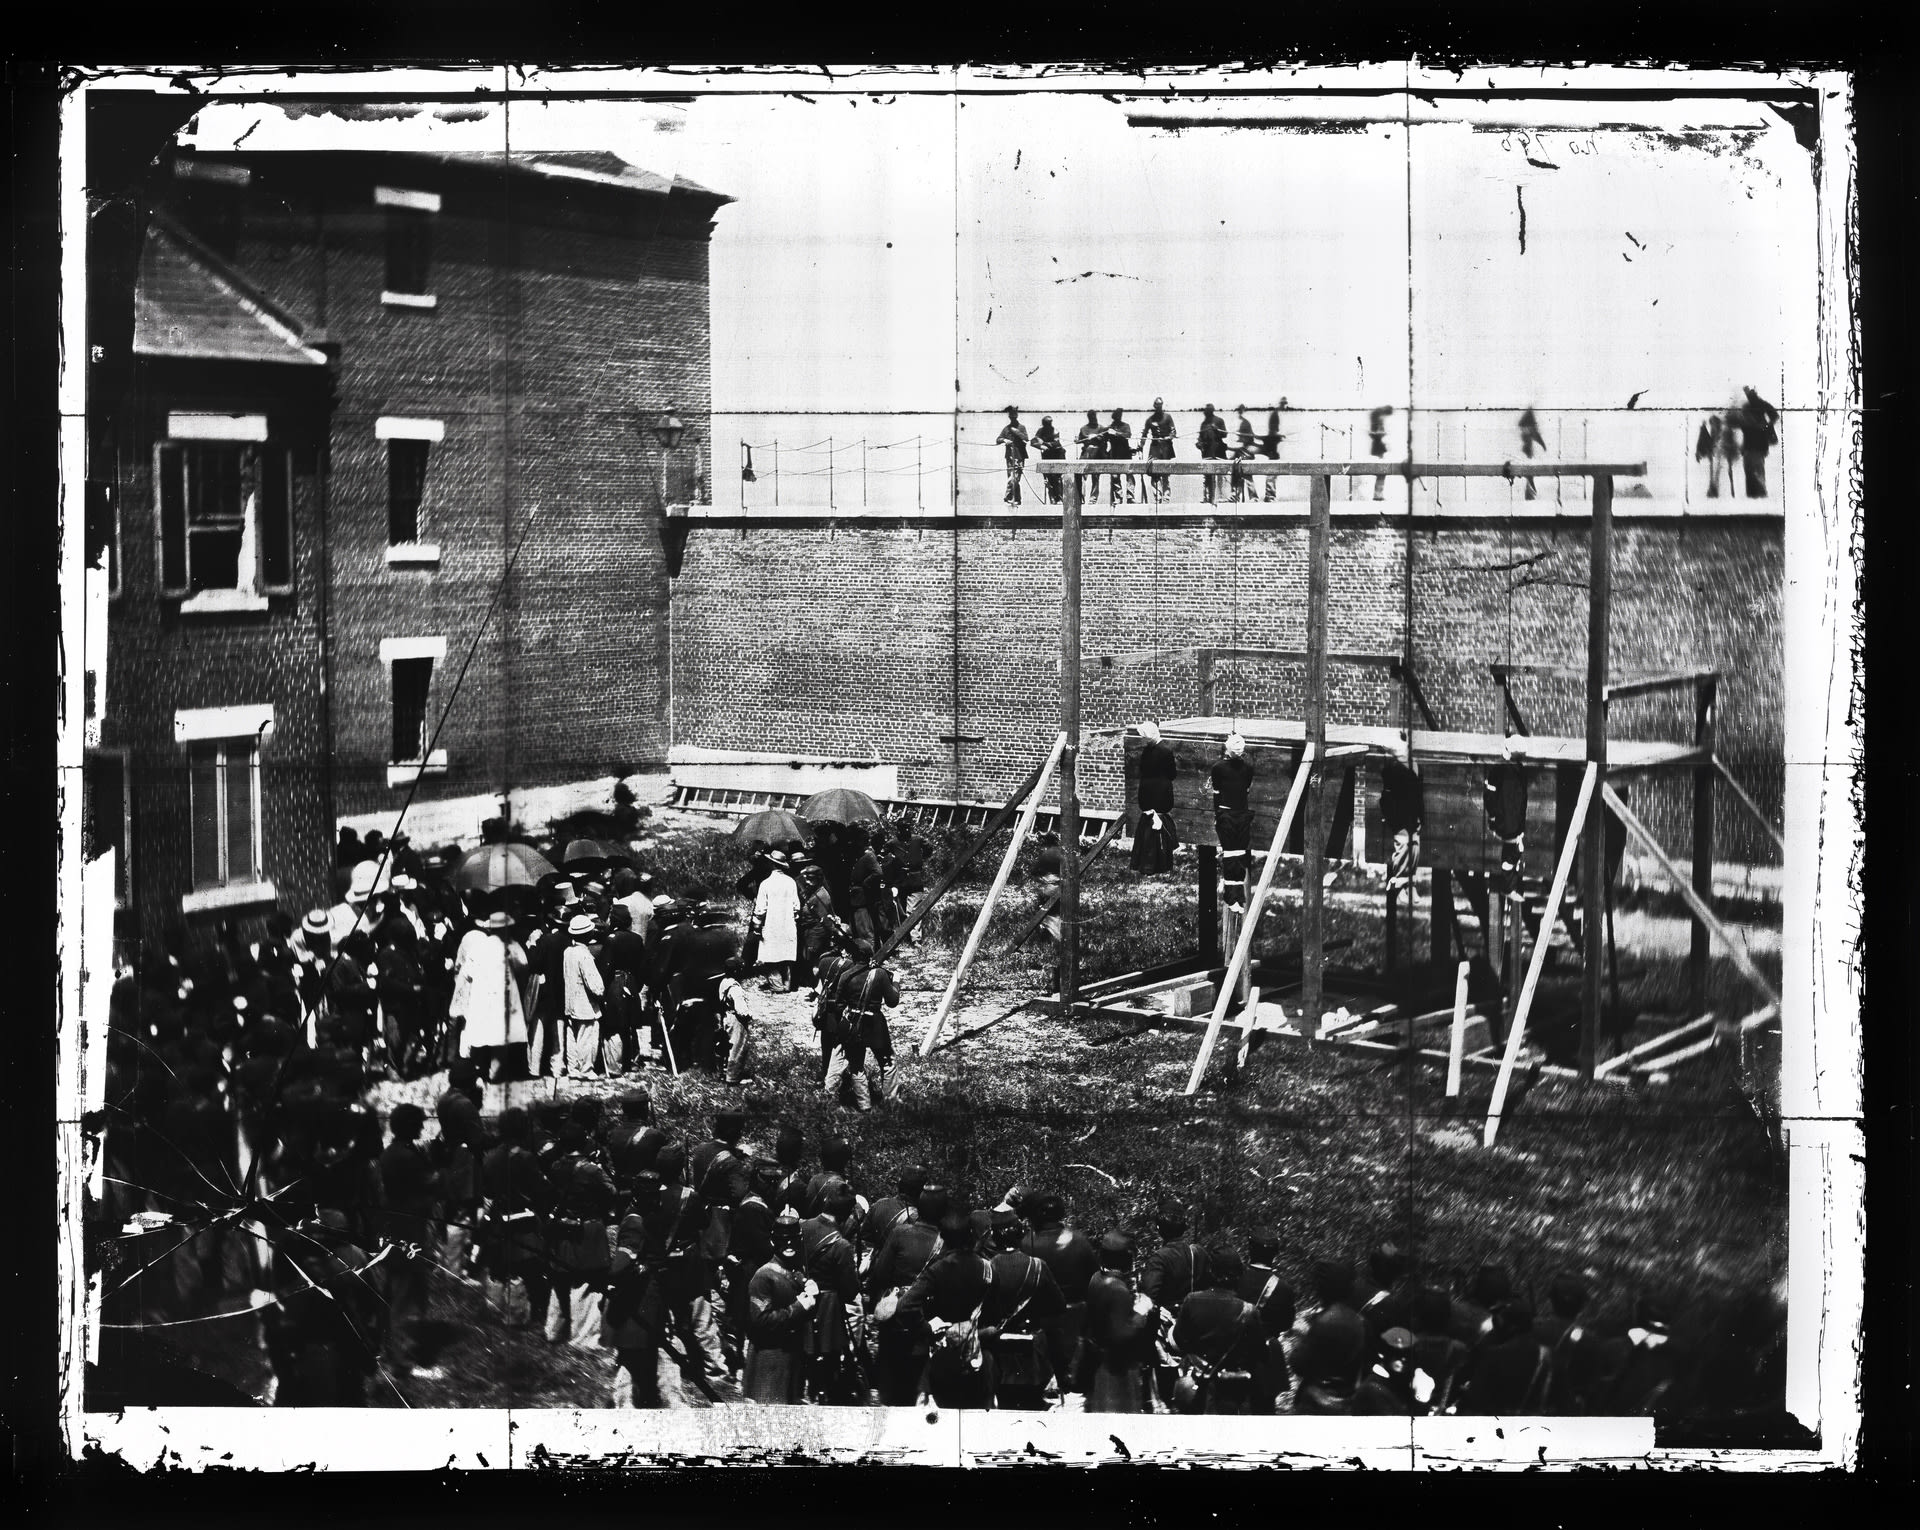 July 7, 1865 - Execution of the Lincoln Conspirators